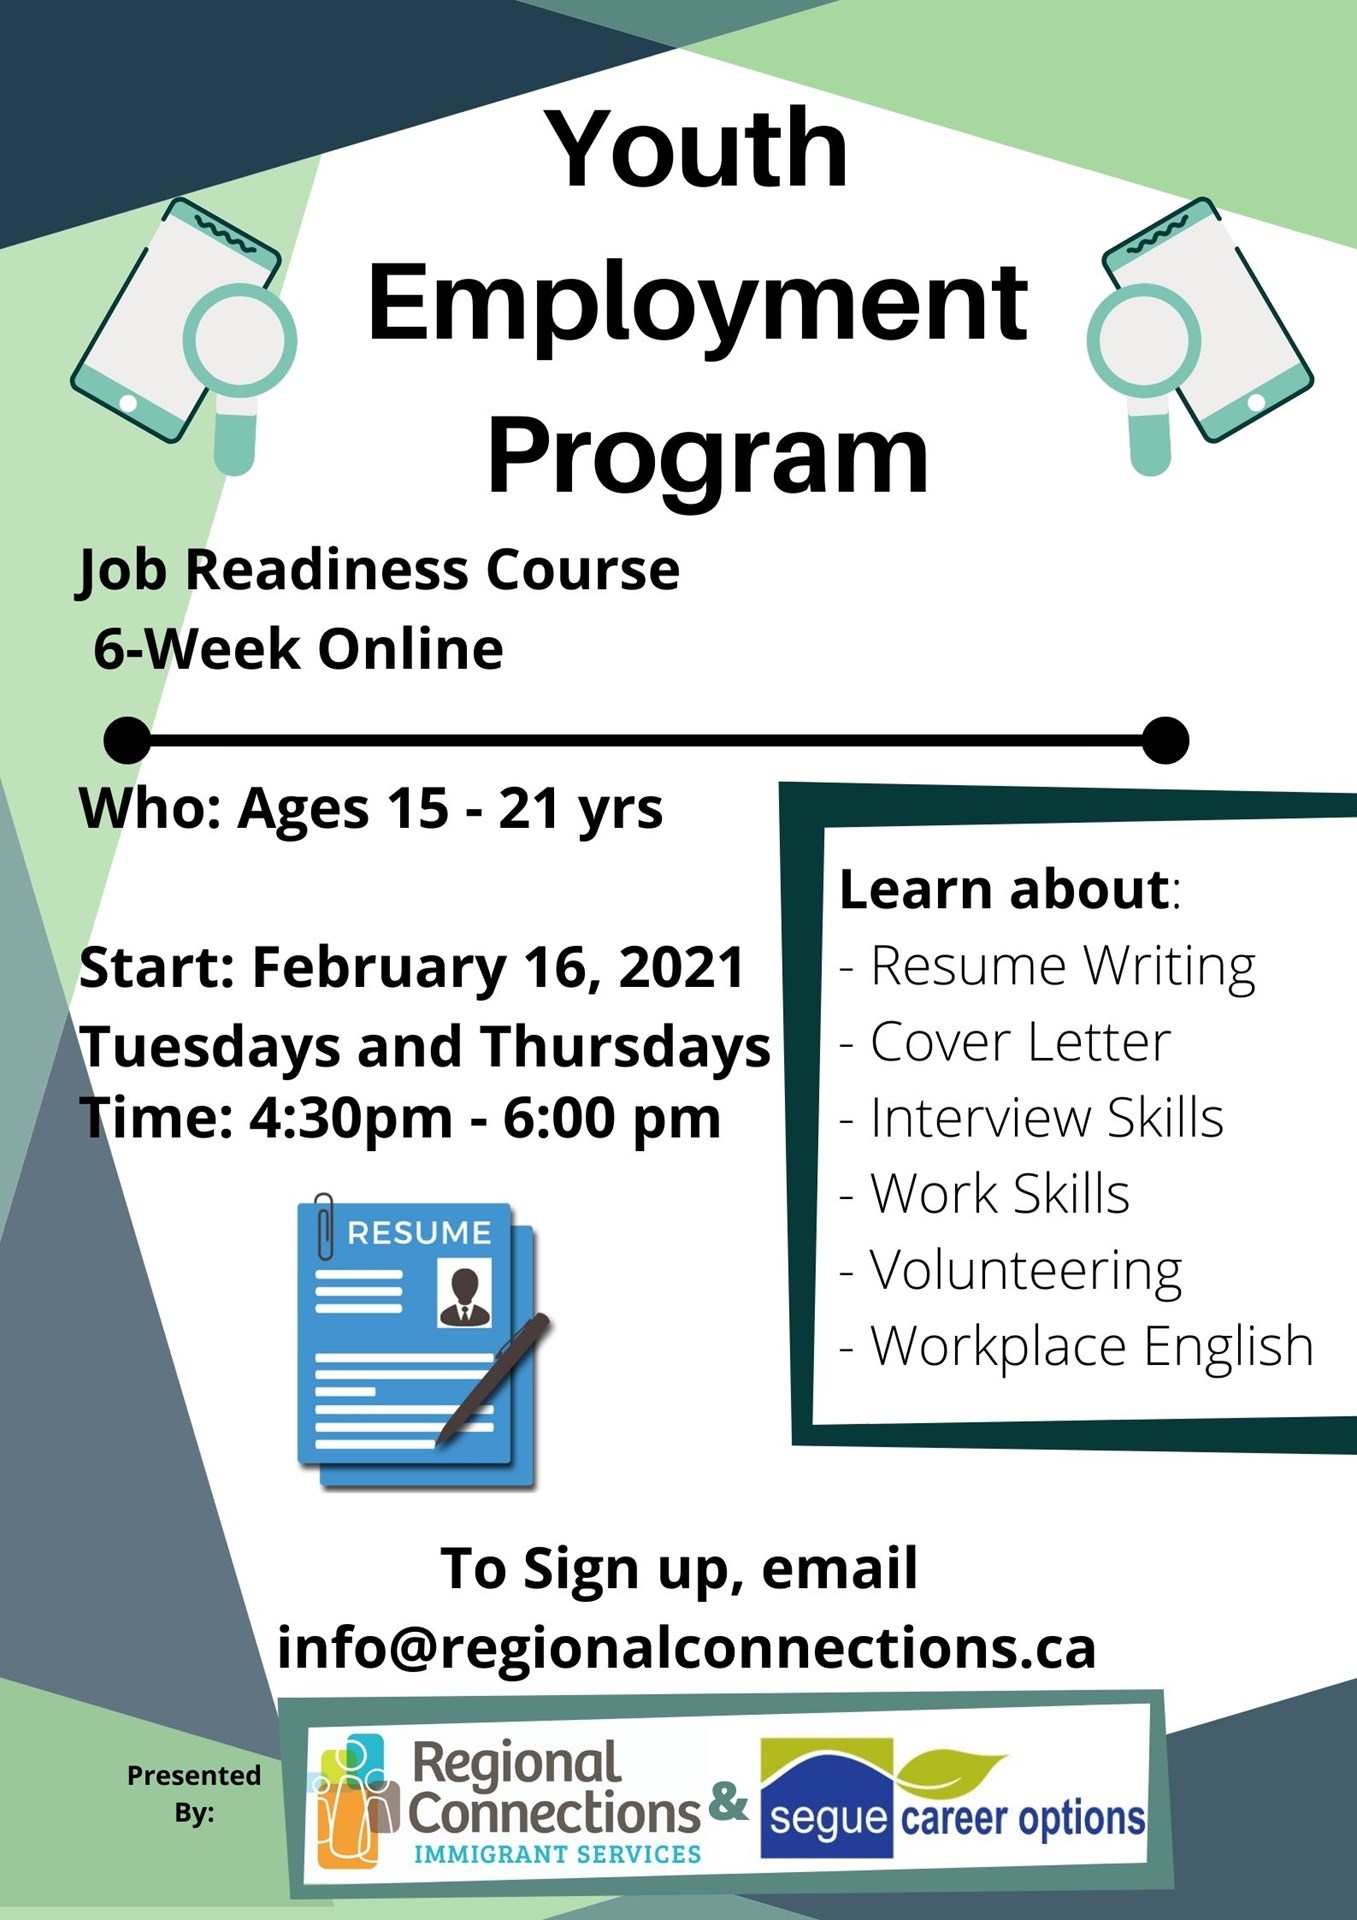 Youth Employment Program Poster - updated.jpg